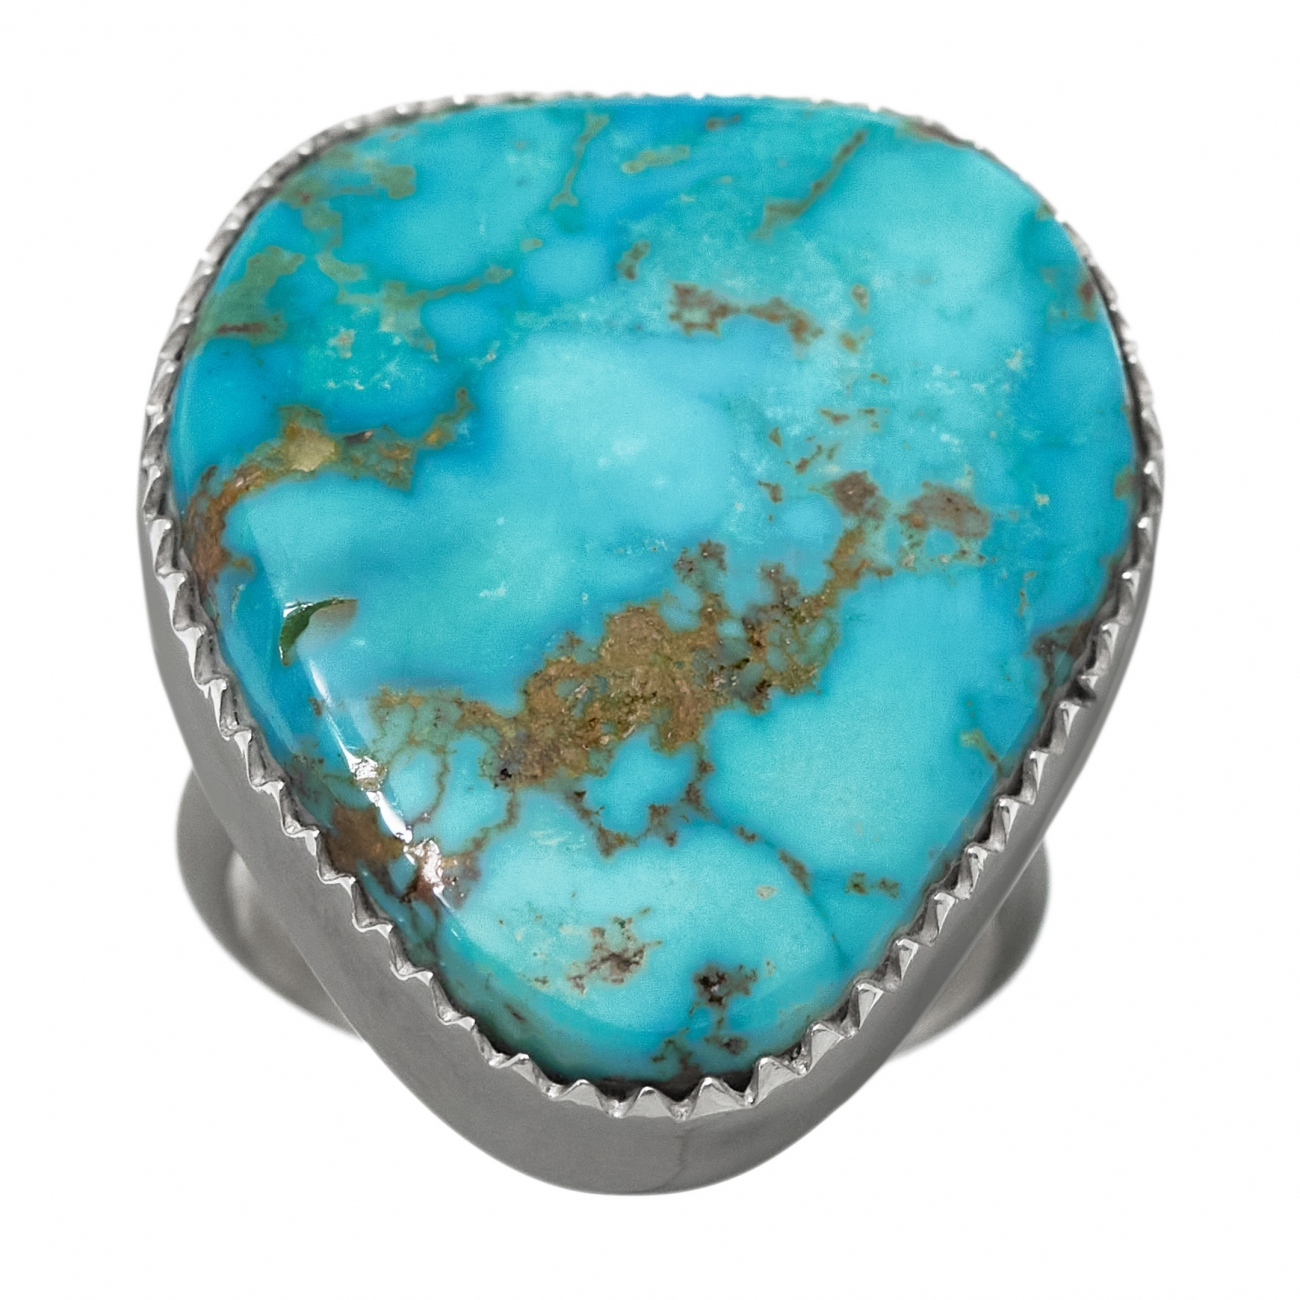 Navajo ring BA1147 in turquoise and silver - Harpo Paris